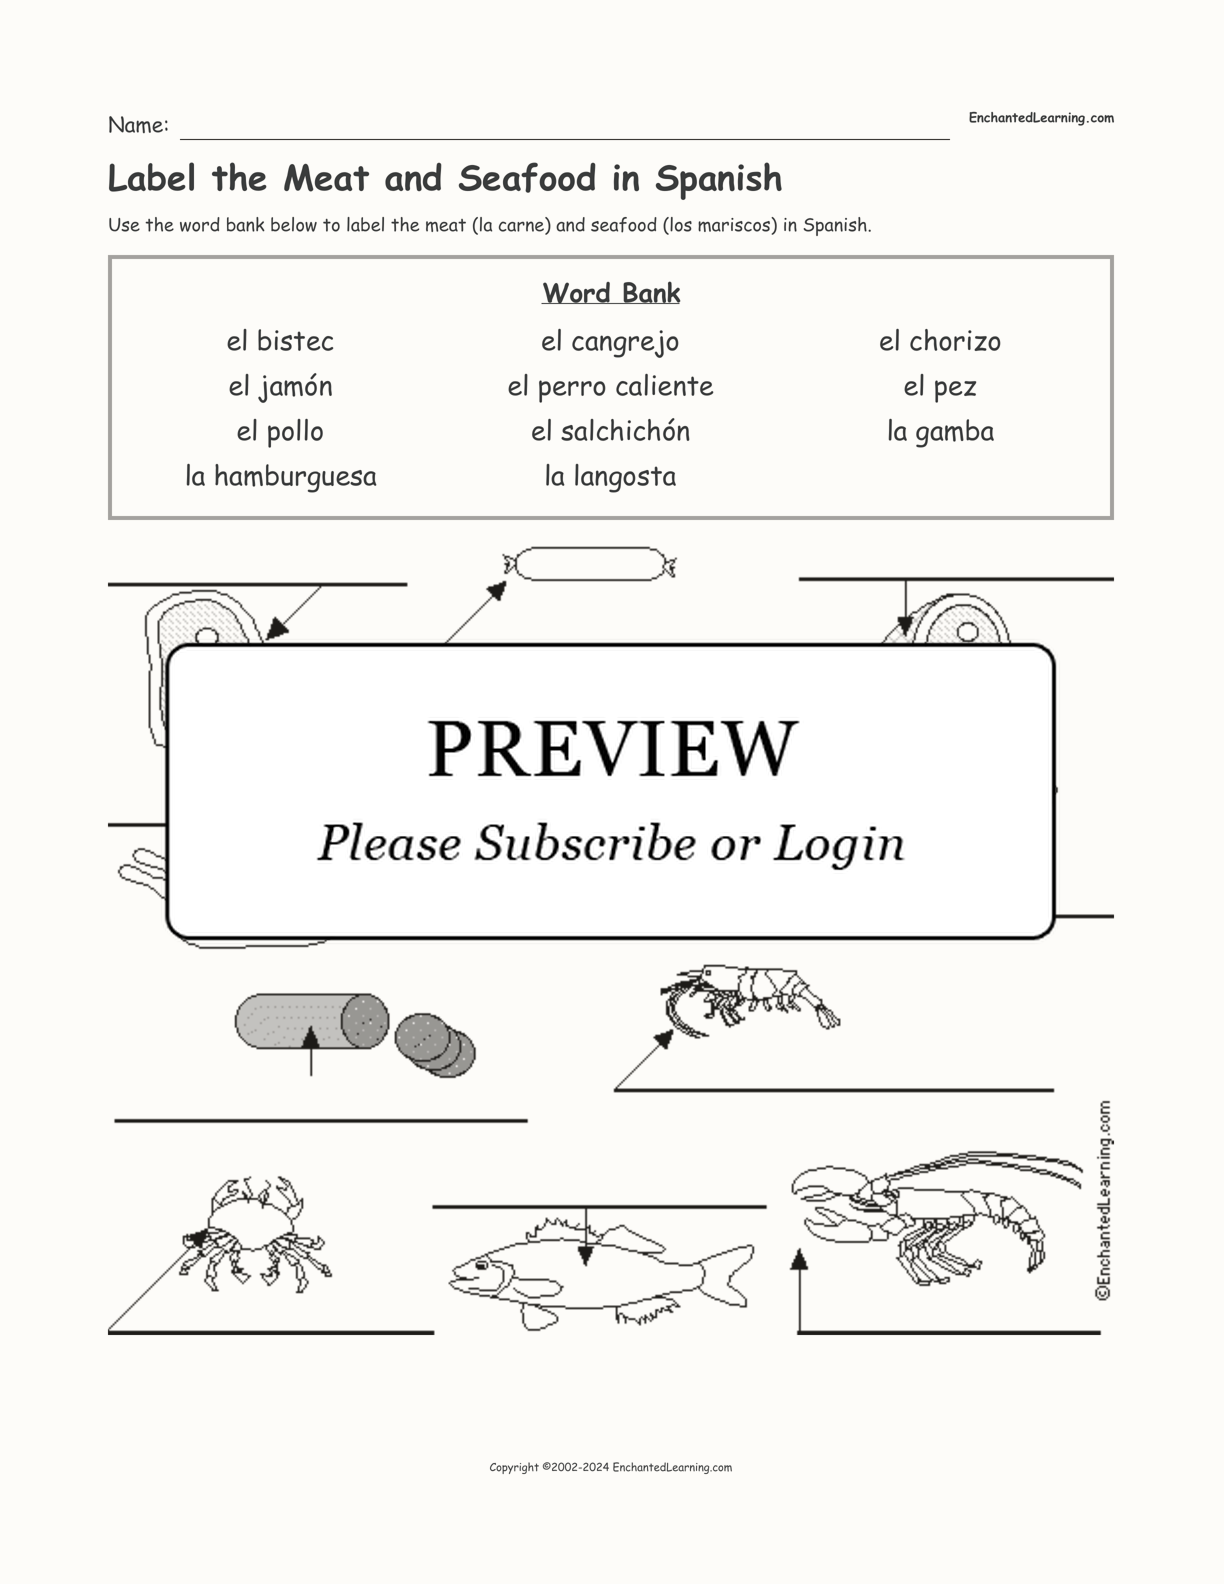 Label the Meat and Seafood in Spanish interactive worksheet page 1